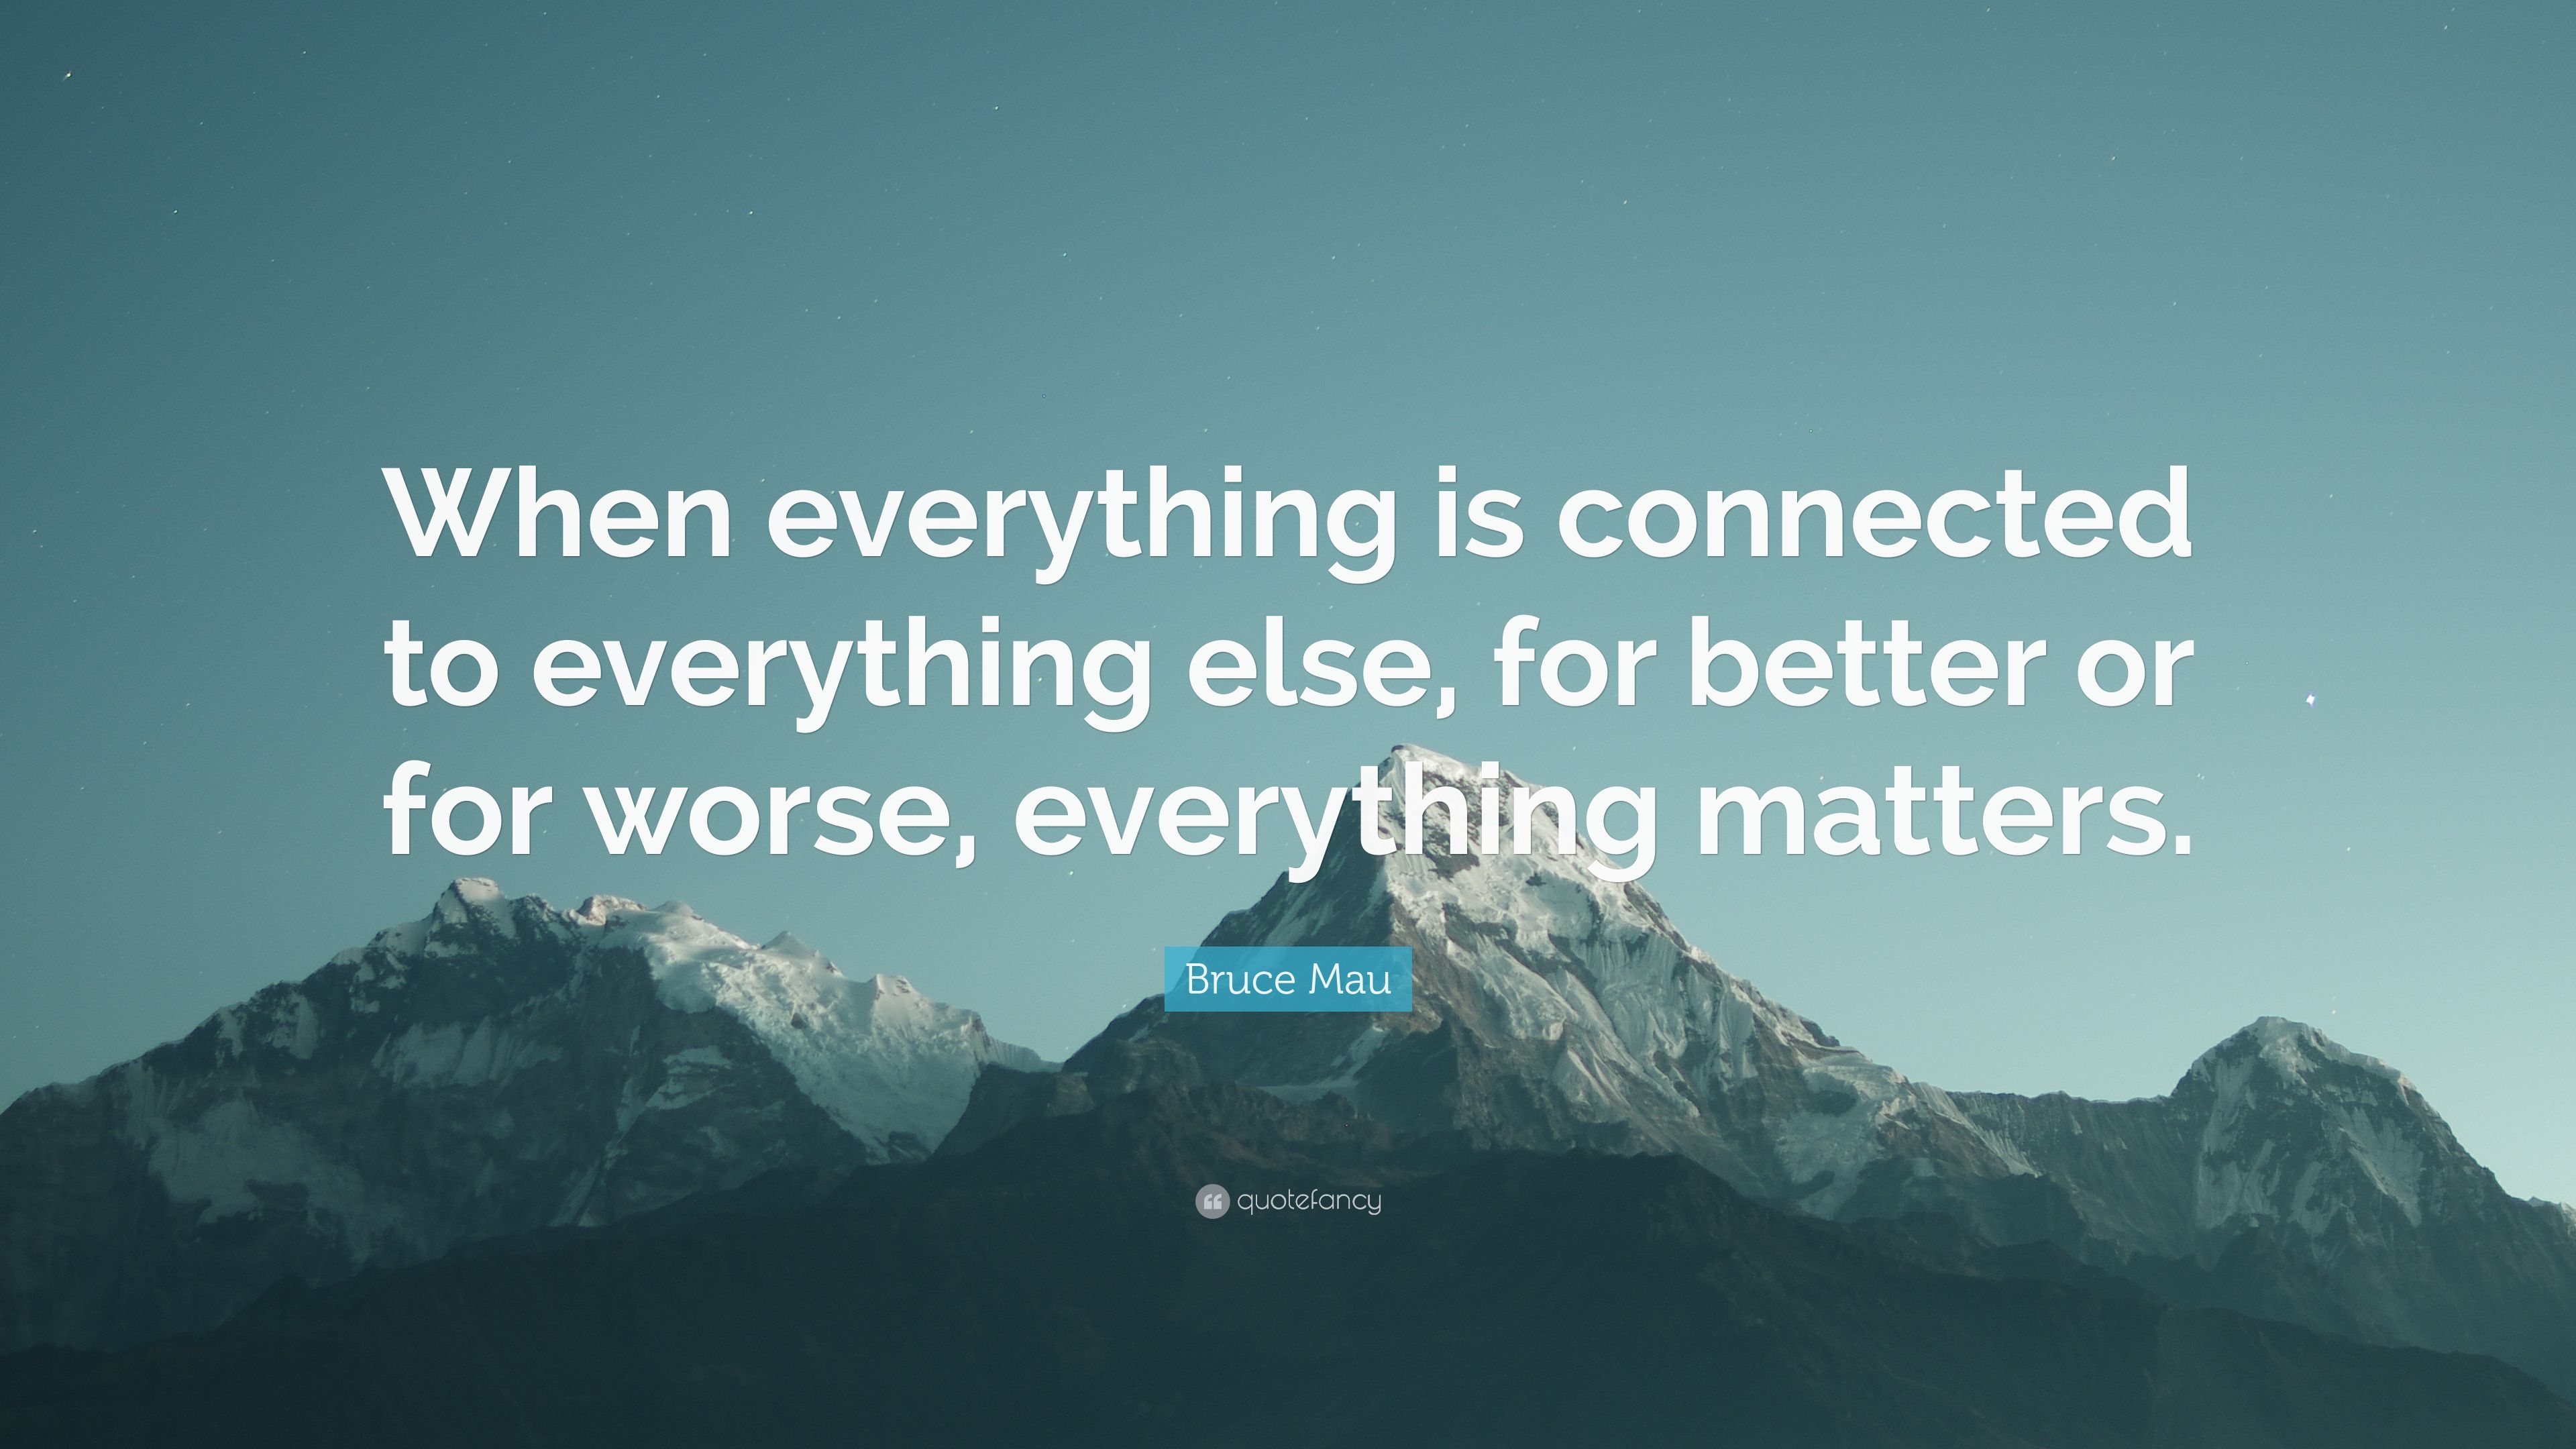 Bruce Mau Quote: “When everything is connected to everything else, for better or for worse, everything matters.” (7 wallpaper)